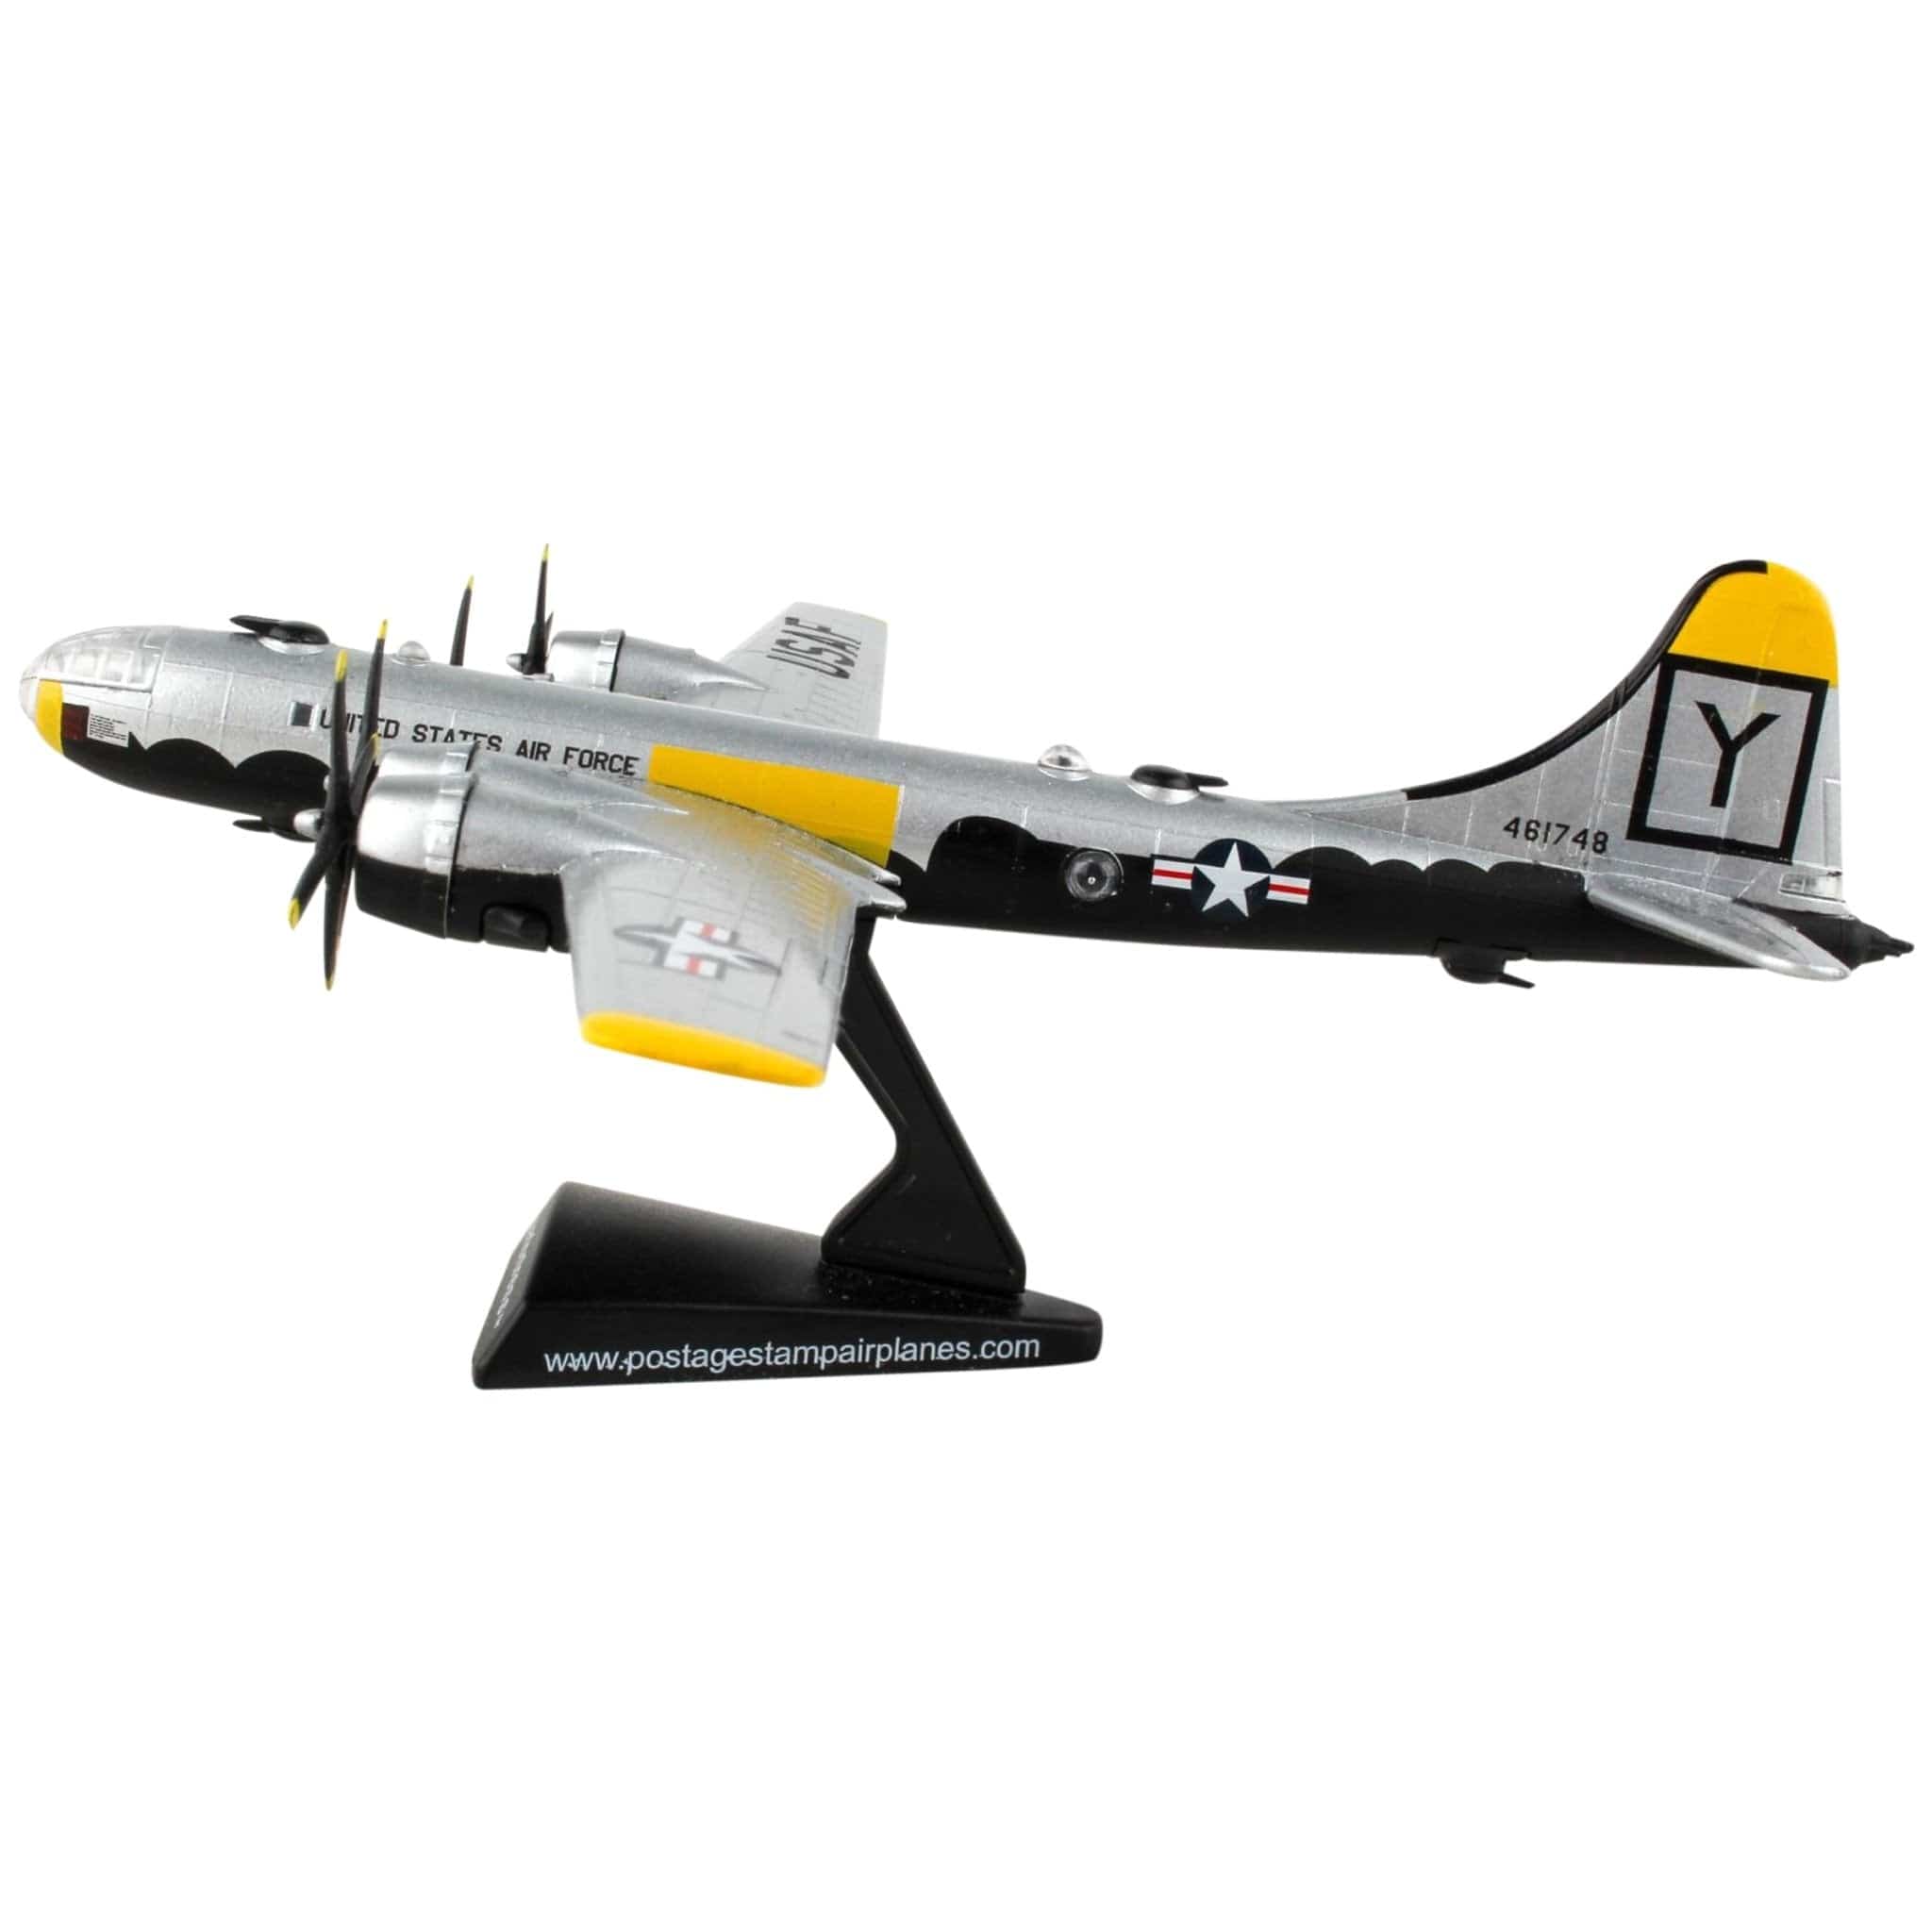 Postage Stamp B-29 Superfortress 1/200 Hawg Wild Die-Cast Metal Model Aircraft